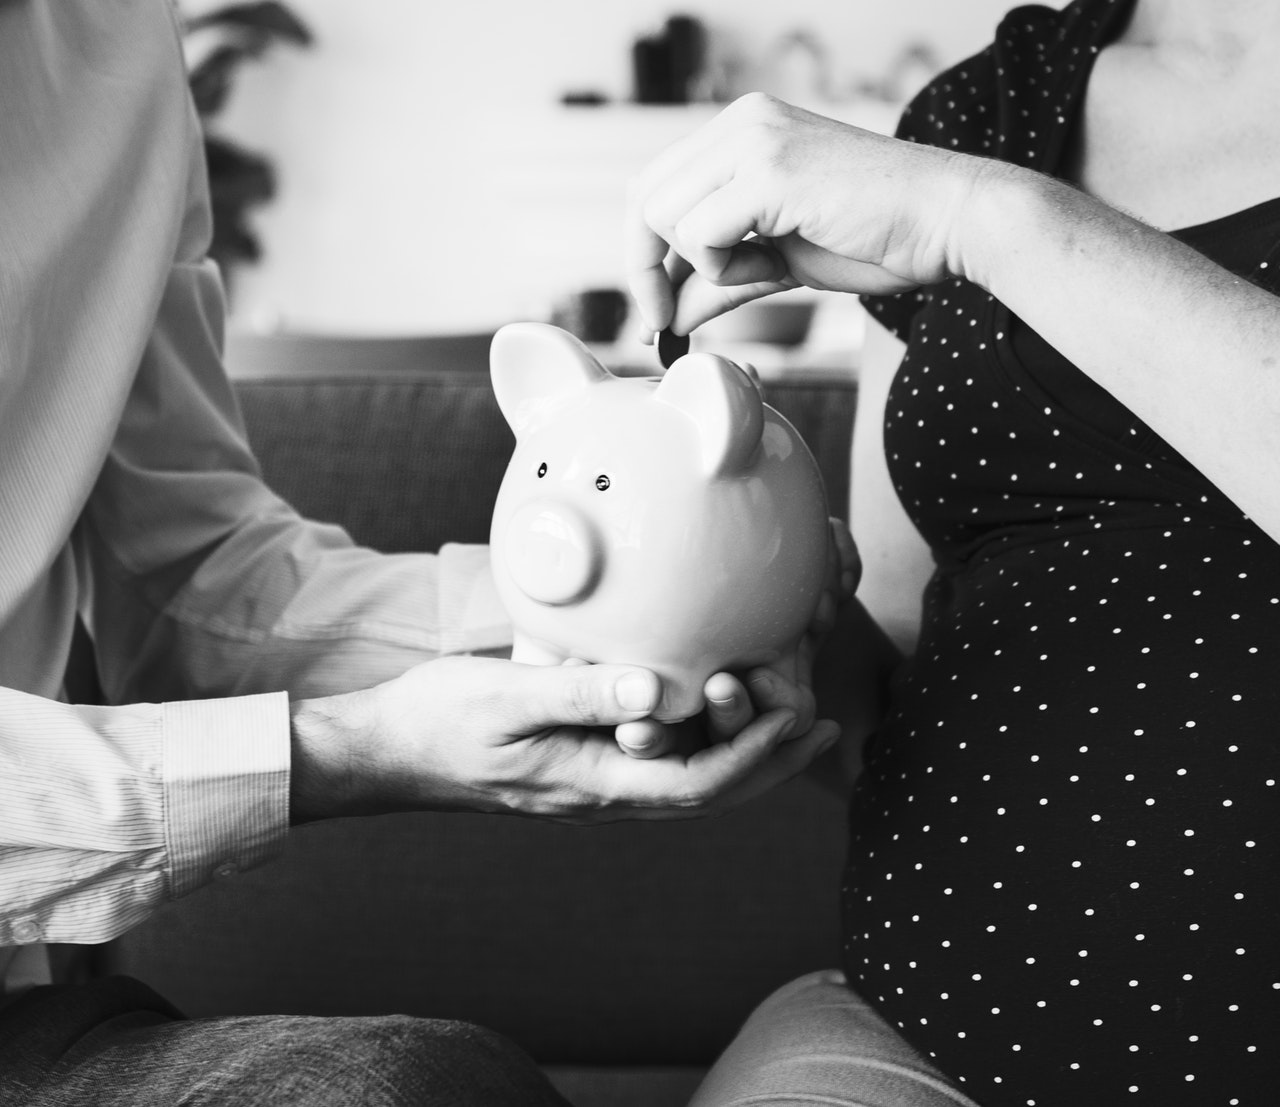 22 Financial Red Flags That Can Hurt a Relationship